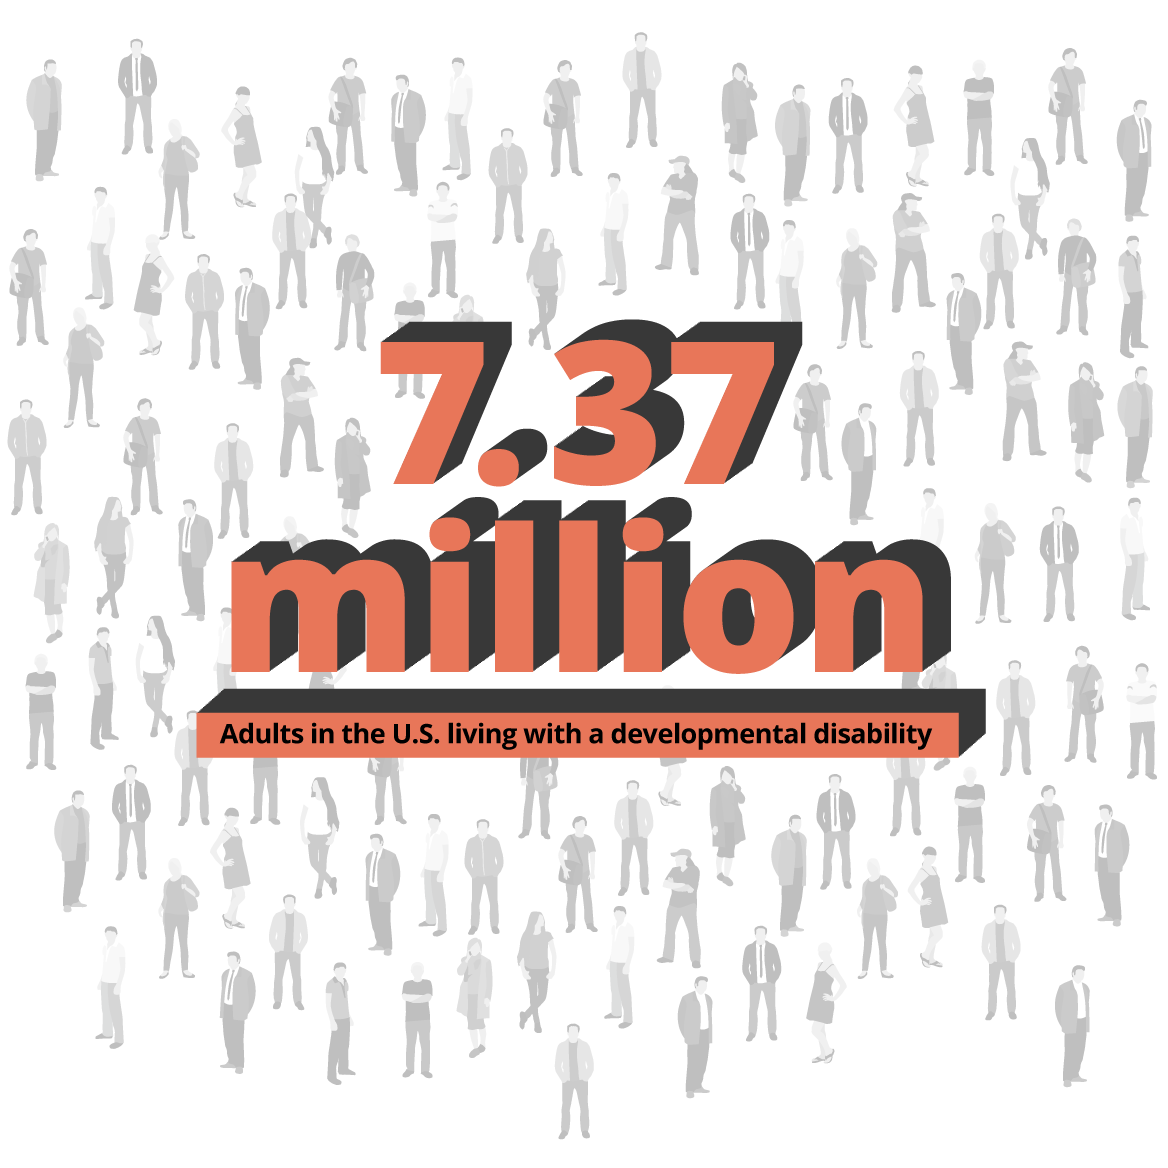 7.37 million adults in the US are living with a developmental disability